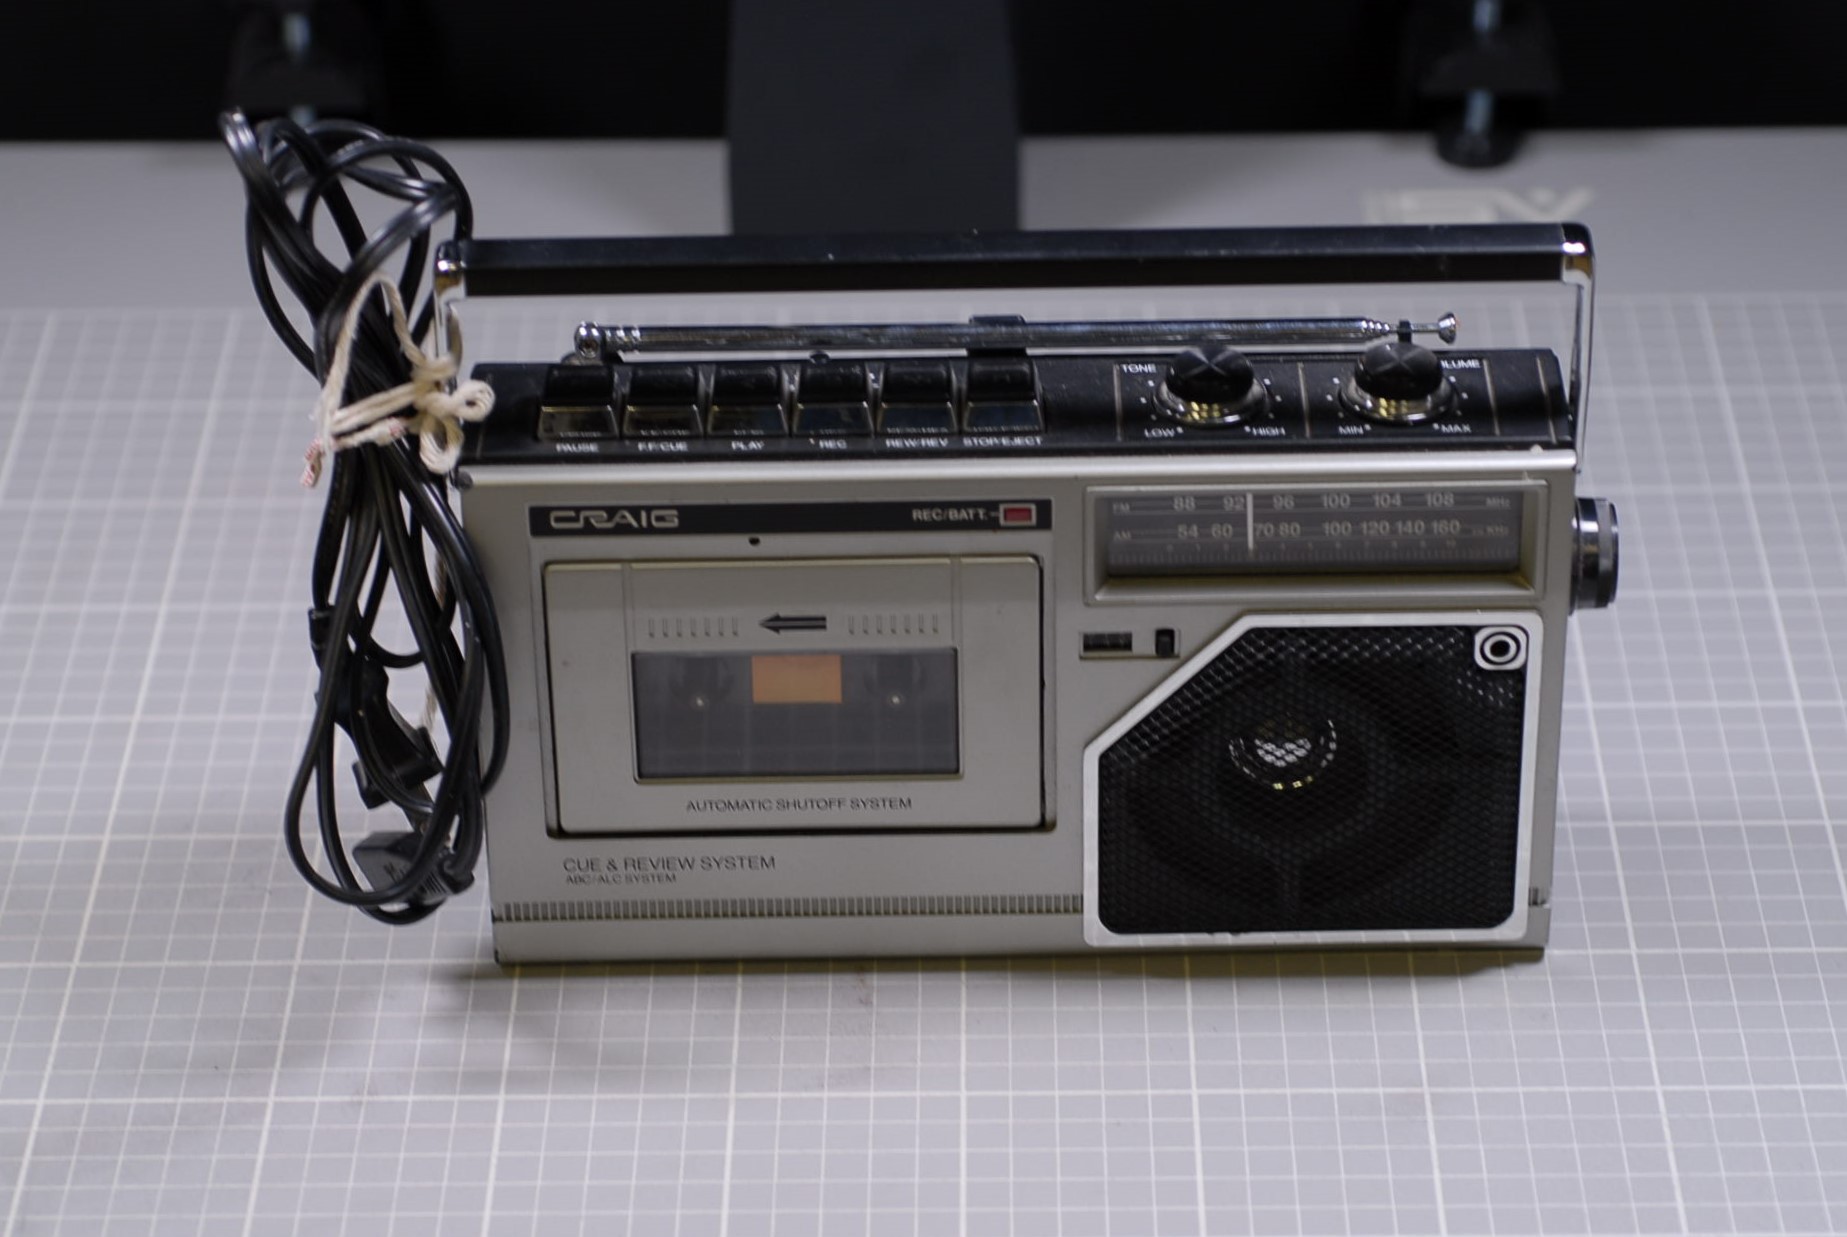 Photo of a modest-sized portable cassette tape player, photographed on a gray gridded mat to indicate the size. The cord is bundled, tied together with string to the handle. There is a cassette tape player on the left, and a window indicating radio bands, along with a silver speaker encased in a black mesh cover, on the right side of the player. Along the top of the device are buttons to operate the tape player, and two dials to control the sound. An antenna is lying flat against the top of the device.